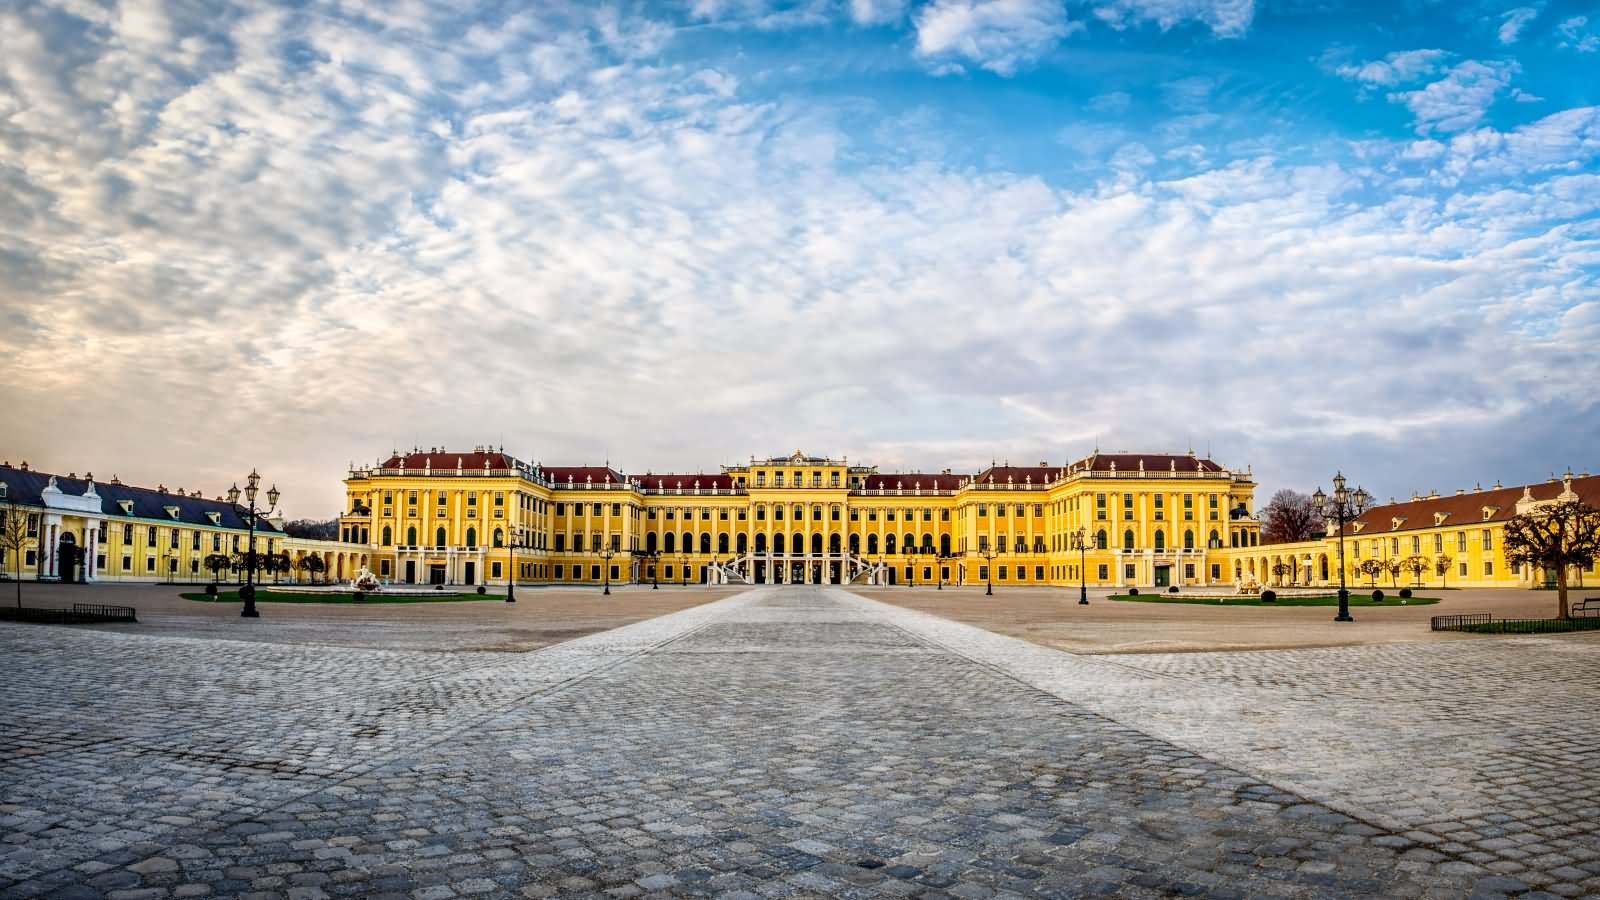 The Schonbrunn Palace View From The Main Entrance